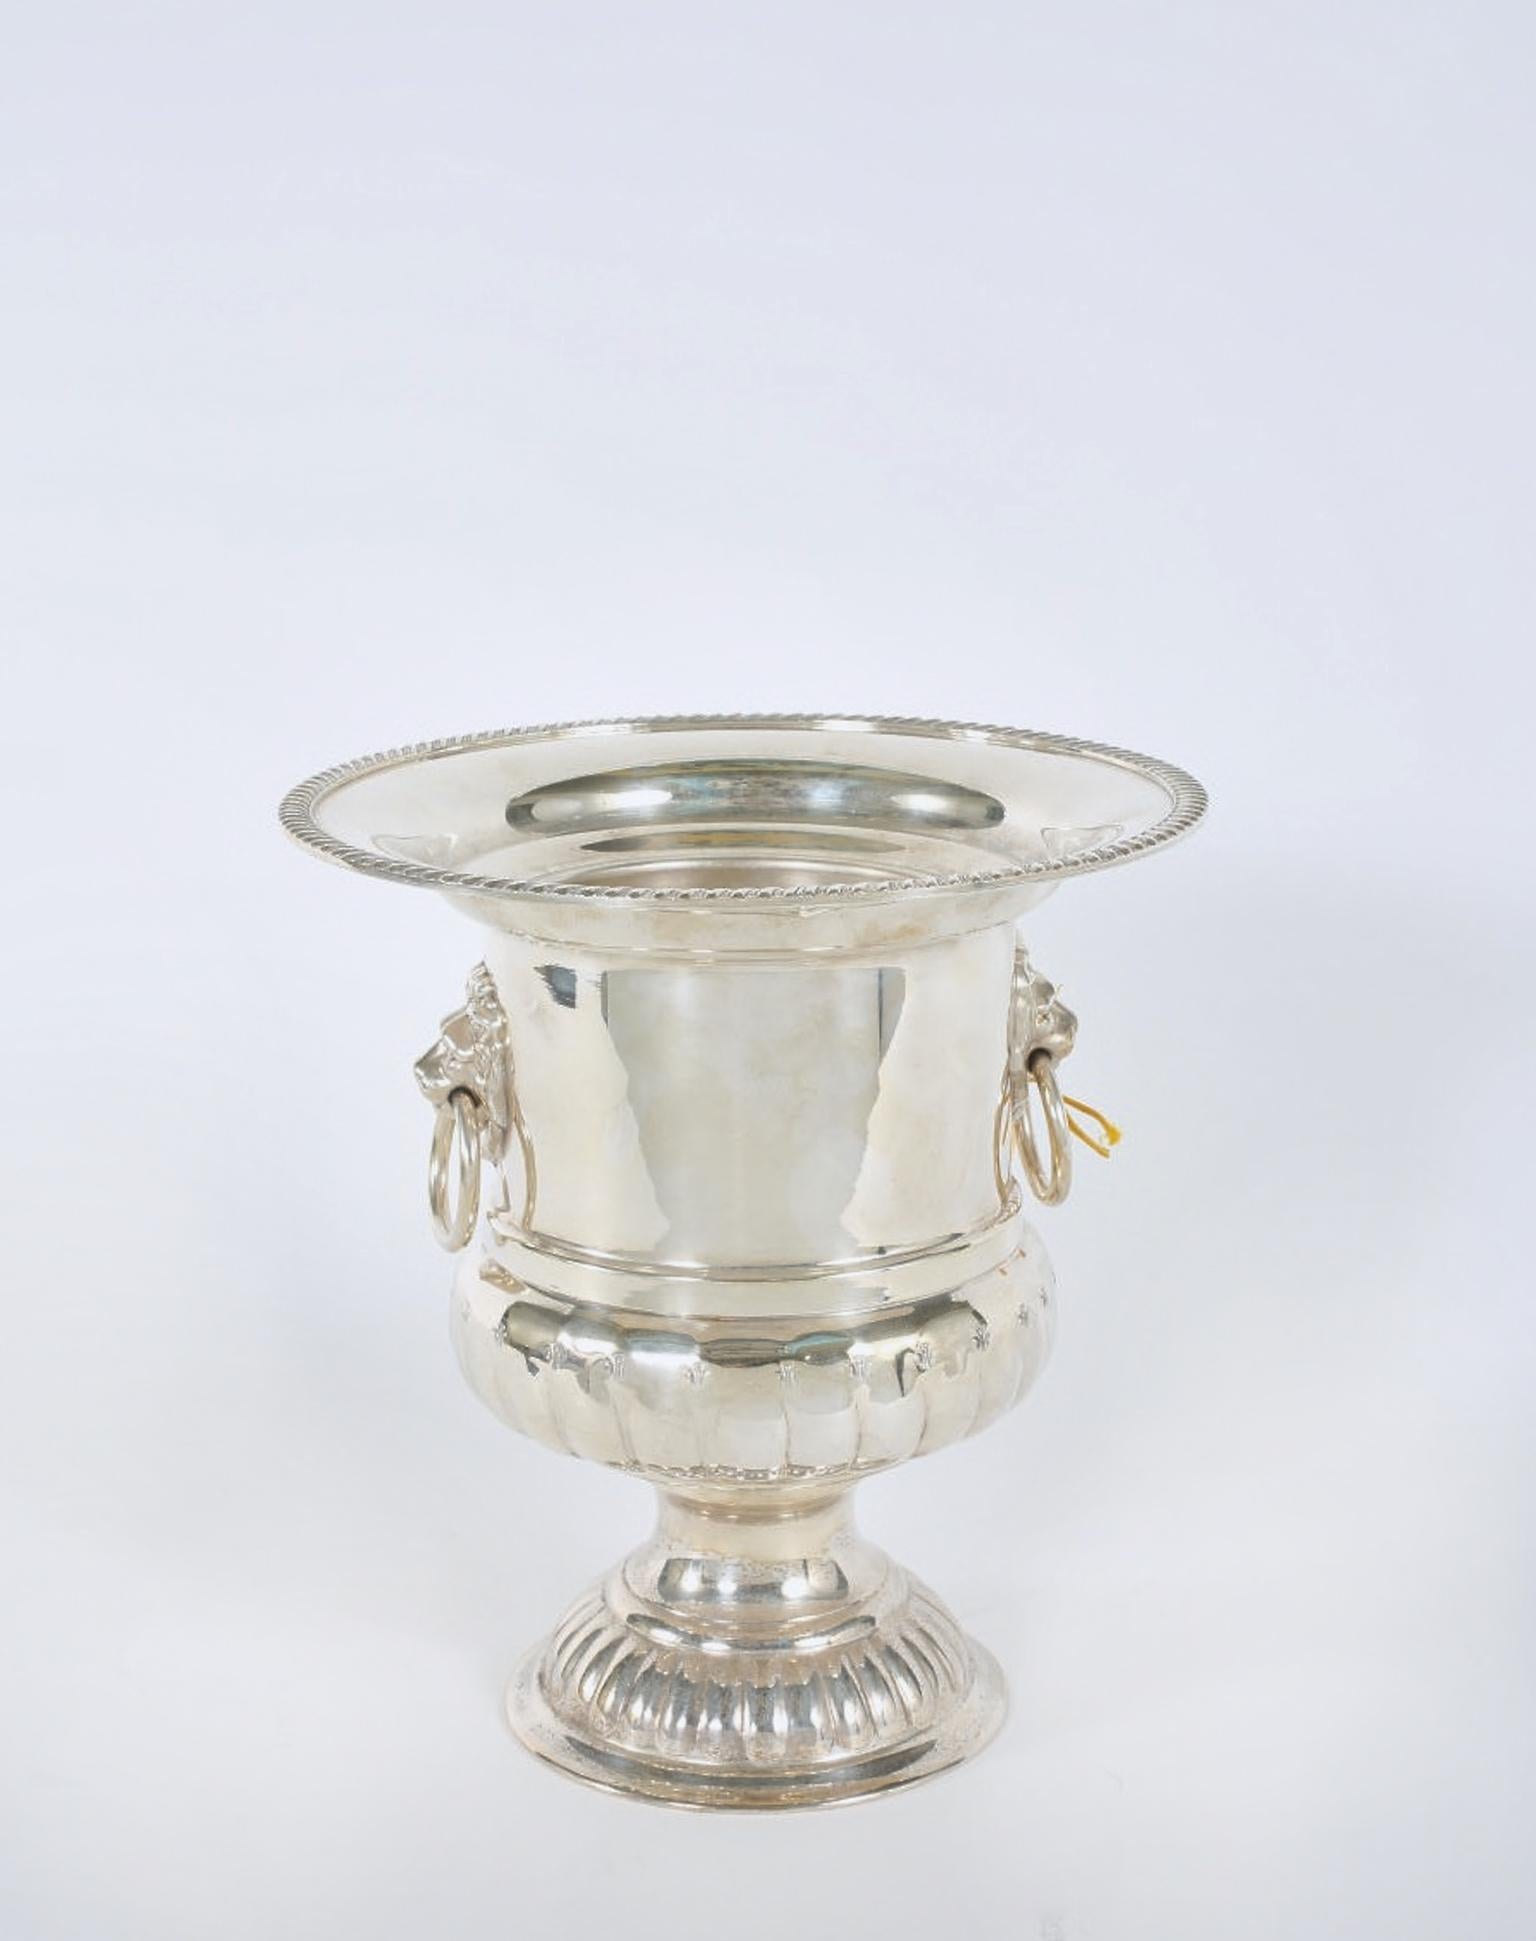 English Sheffield silver plated wine cooler / ice bucket with removable insert and lion head design details handle. Maker’s mark on bottom. The bucket is in good vintage condition with wear consistent with age / use. It measures: 10